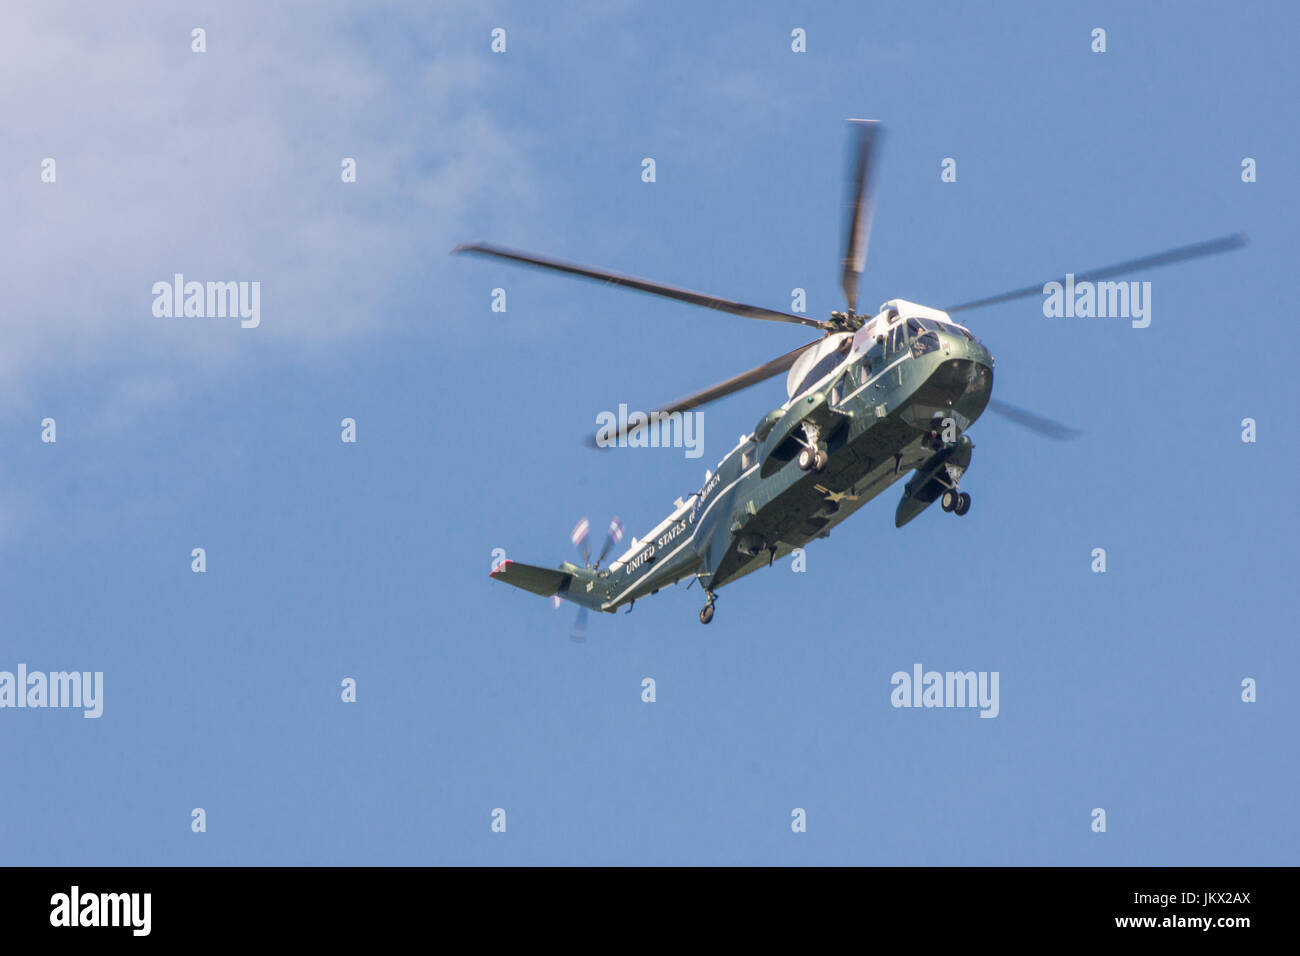 A U.S. Marine Corps Sikorsky VH-3D Sea King helicopter, assigned to Marine Helicopter Squadron 1 (HMX-1), in flight over Washington D.C. When the Pres Stock Photo